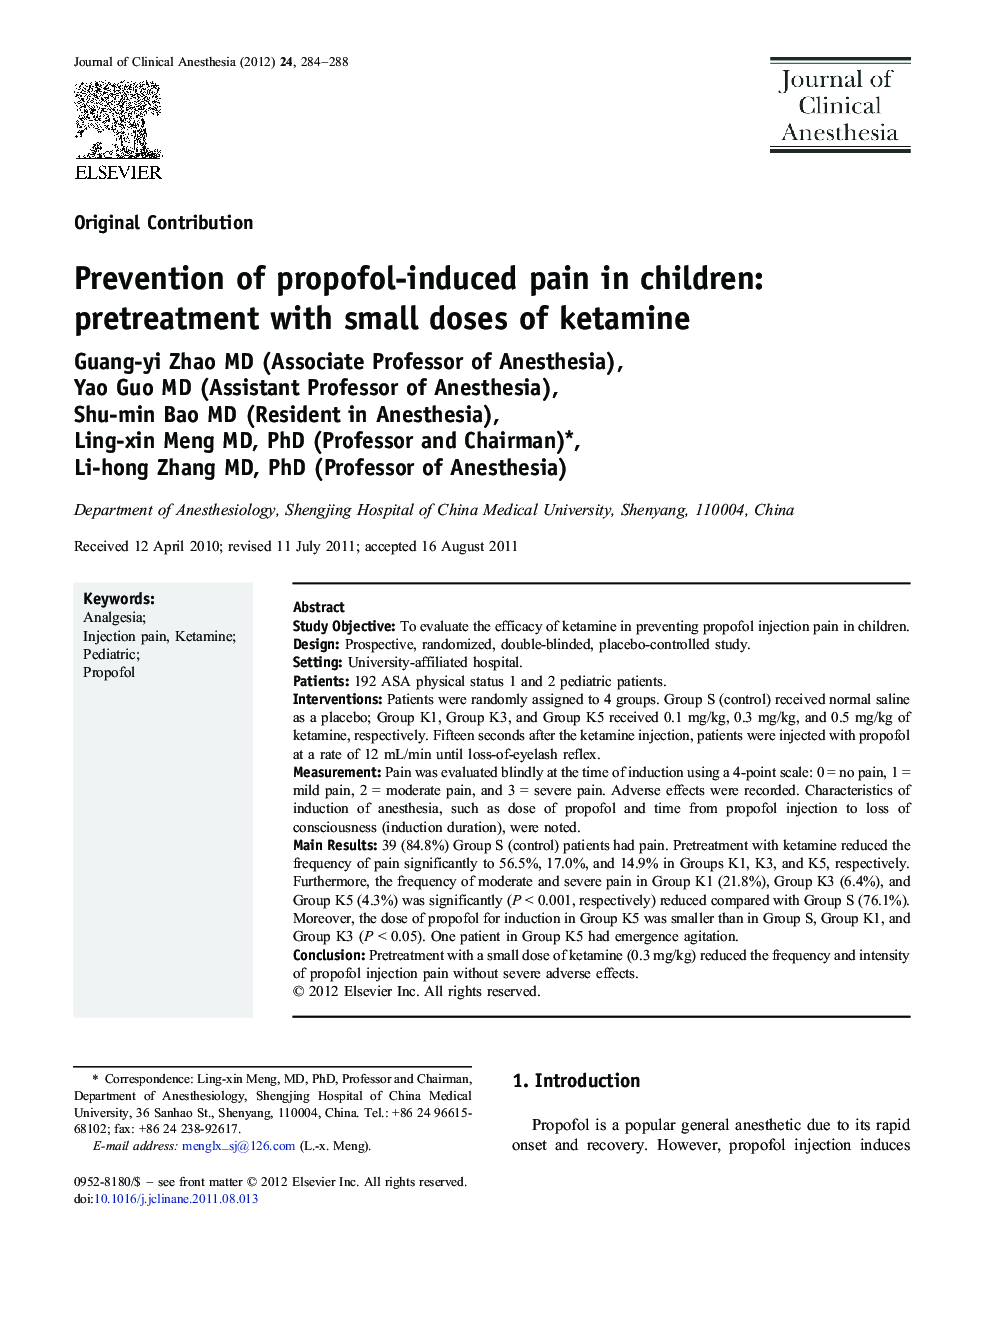 Prevention of propofol-induced pain in children: pretreatment with small doses of ketamine